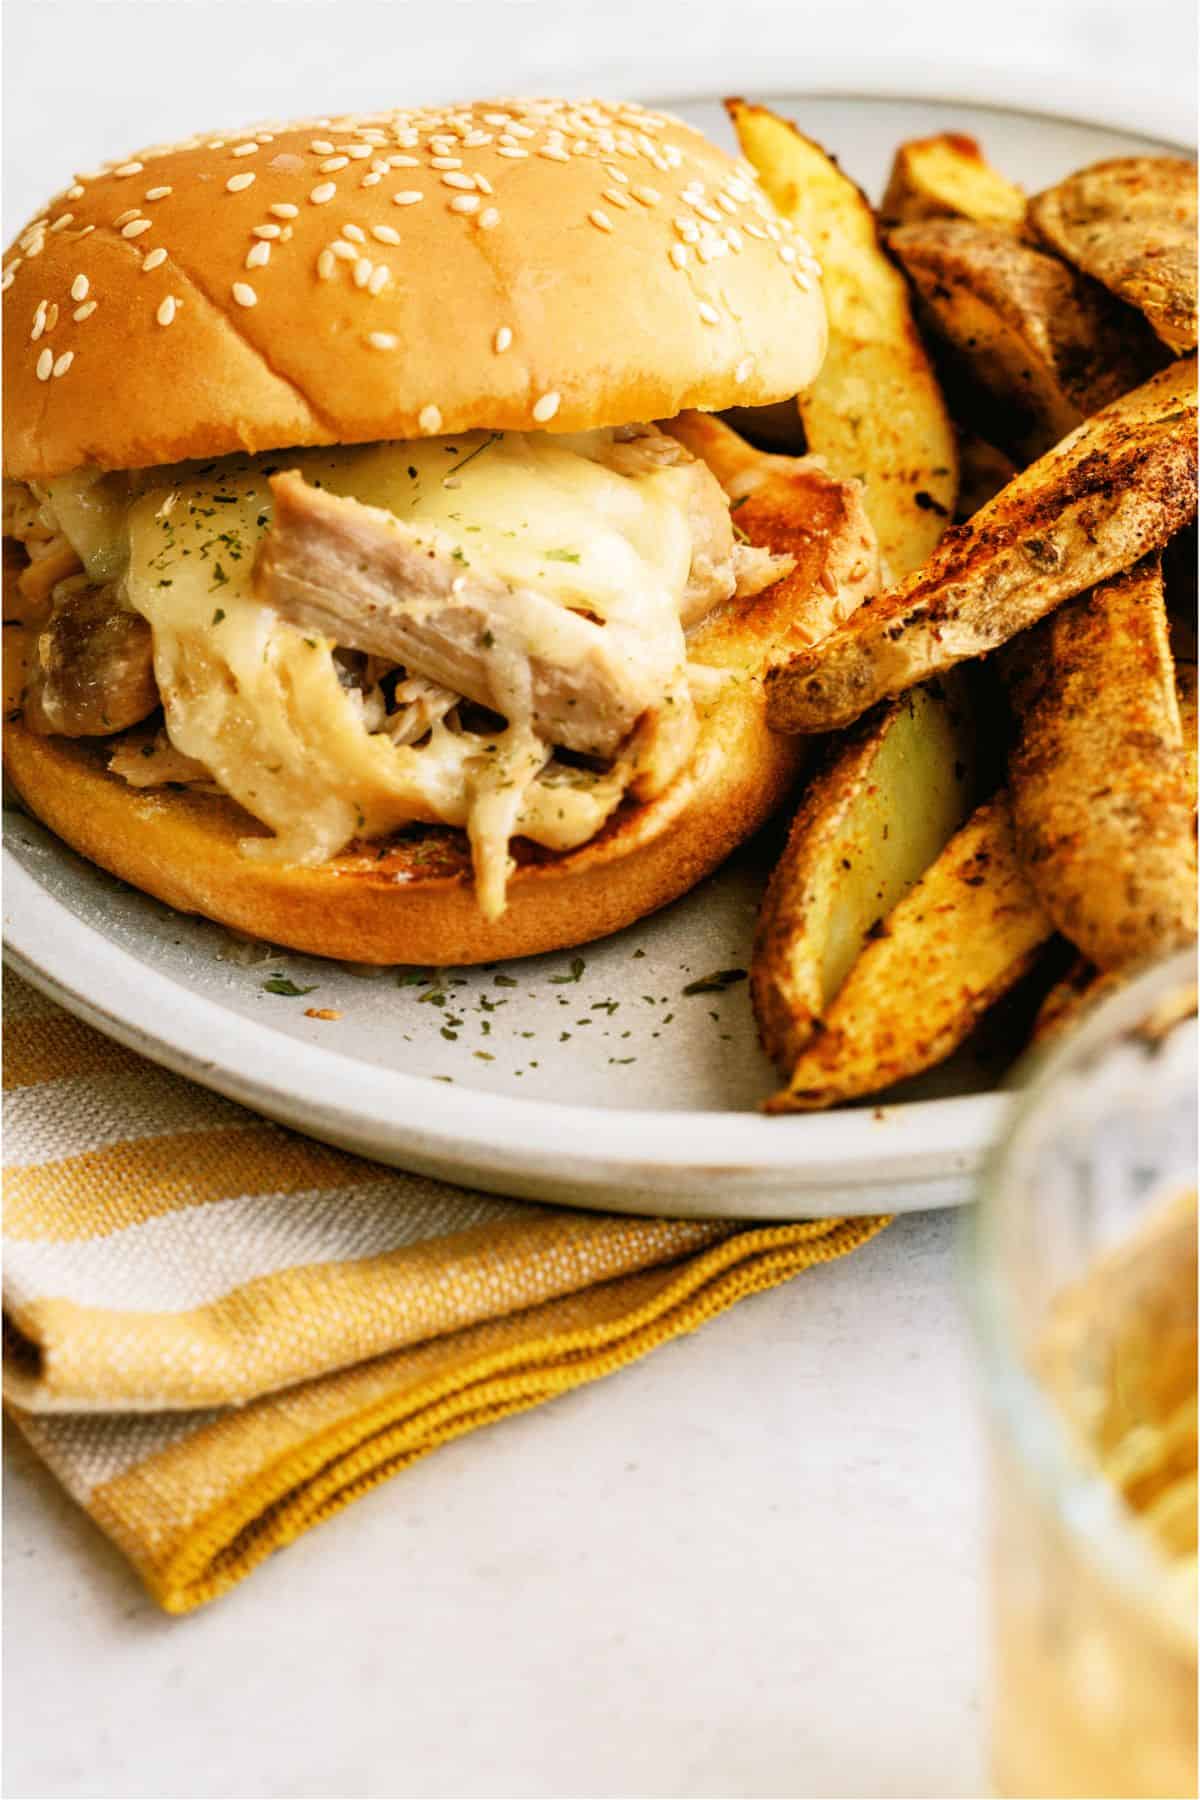 Instant Pot Ranch Chicken and Swiss Sandwich on a plate with fries